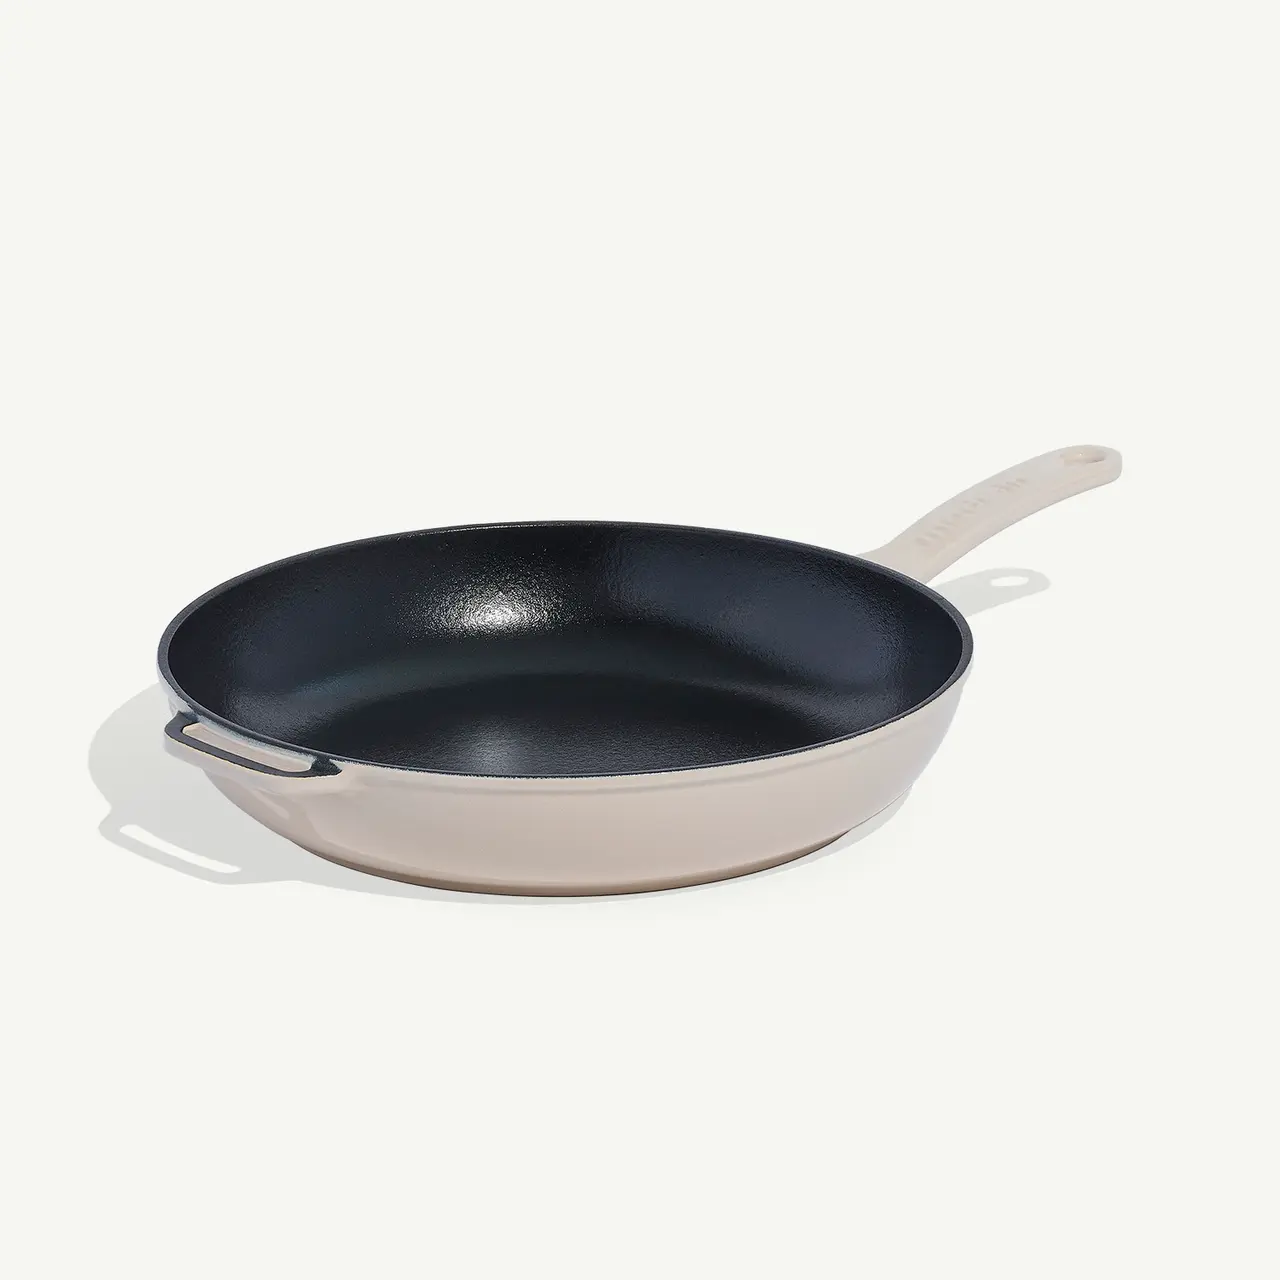 A non-stick frying pan with a beige exterior and a long handle rests on a plain white surface.